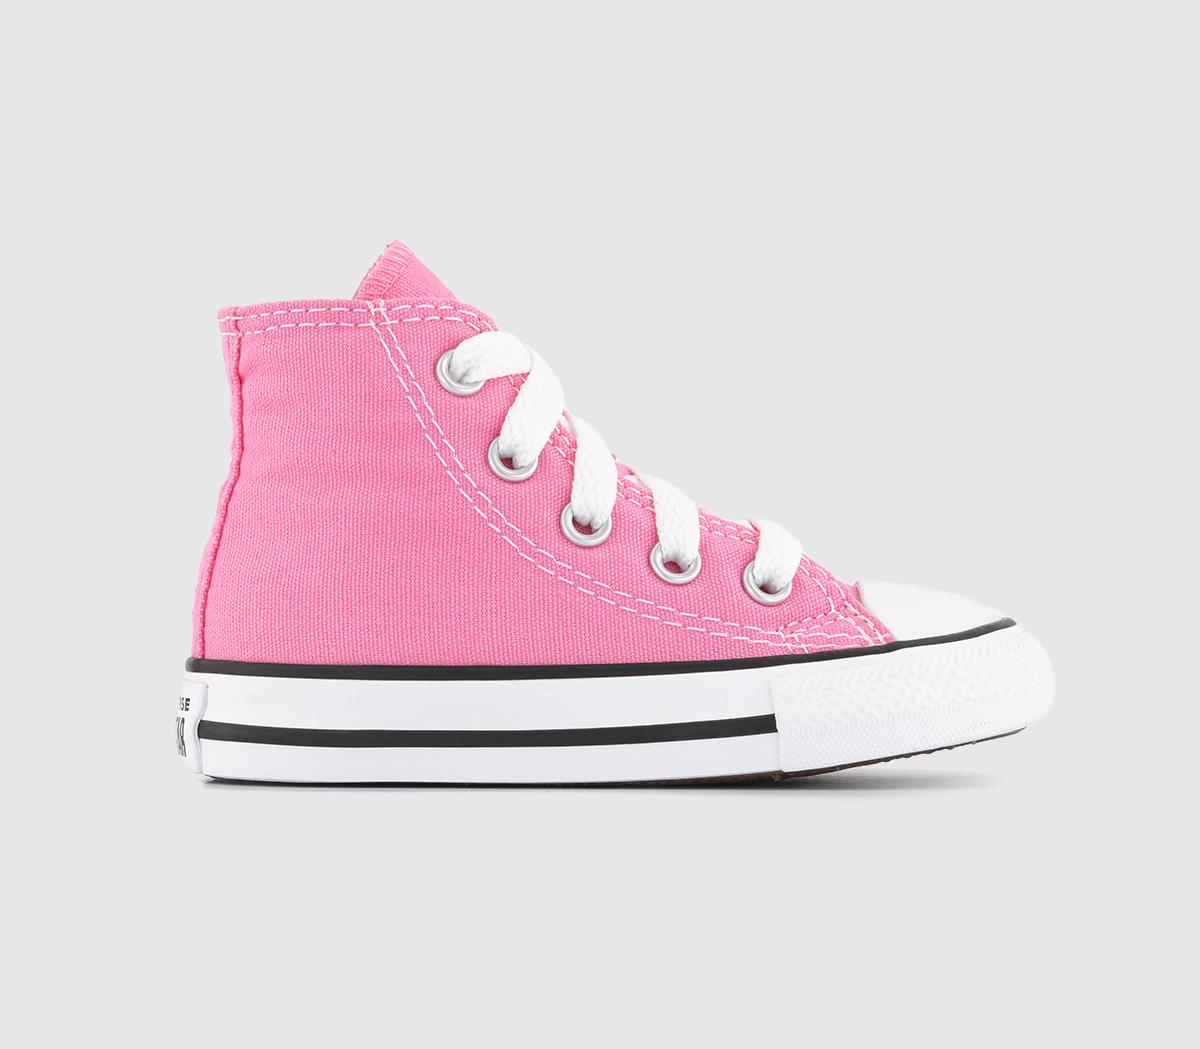 ConverseAll Star Hi Infant Canvas TrainersPink Canvas